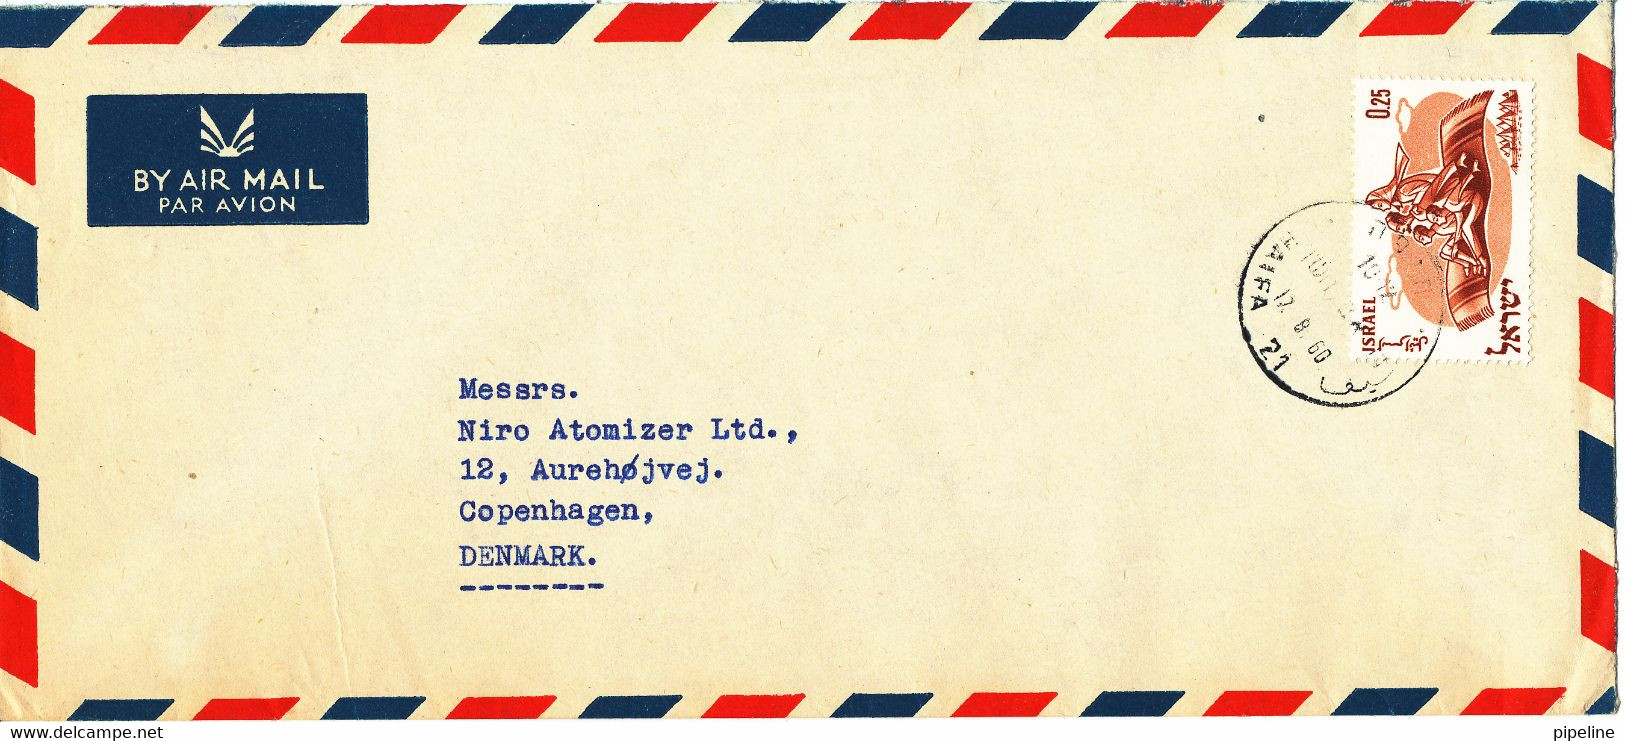 Israel Air Mail Cover Sent To Denmark 12-8-1960 Single Franked - Poste Aérienne